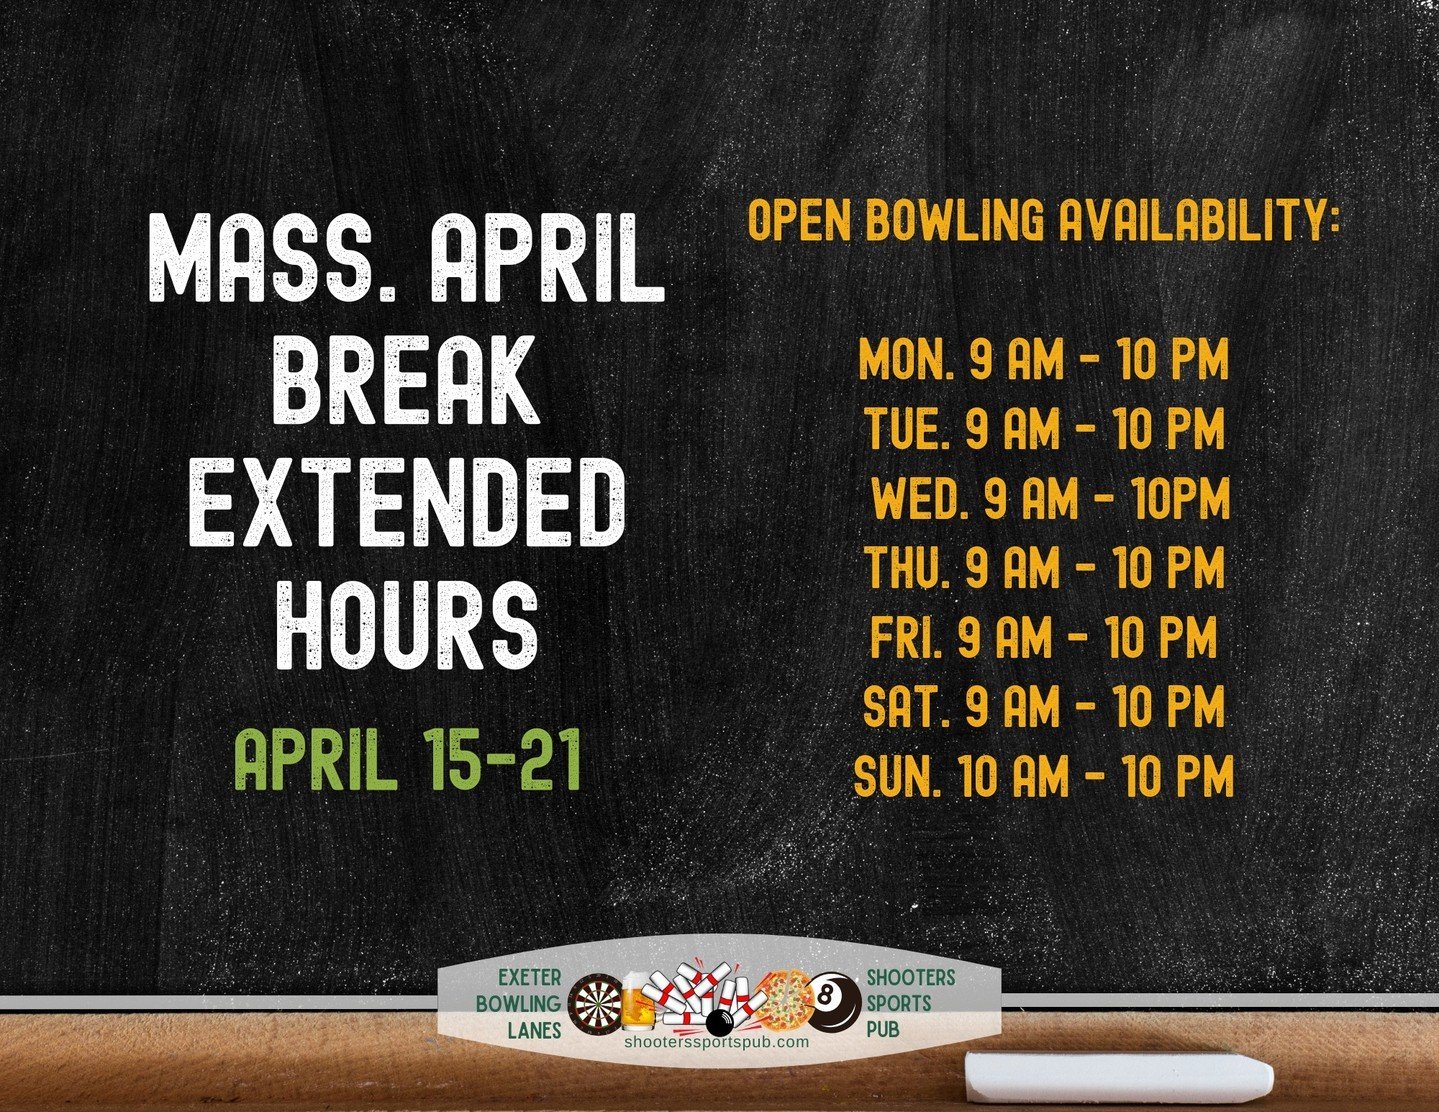 🛎️ School's out for Massachusetts Vacation Week! ⁠
⁠
We're opening early at 9 am daily for extra fun and bowling! Perfect for a family day out. ⁠
⁠
#FamilyFun #ExtendedHours